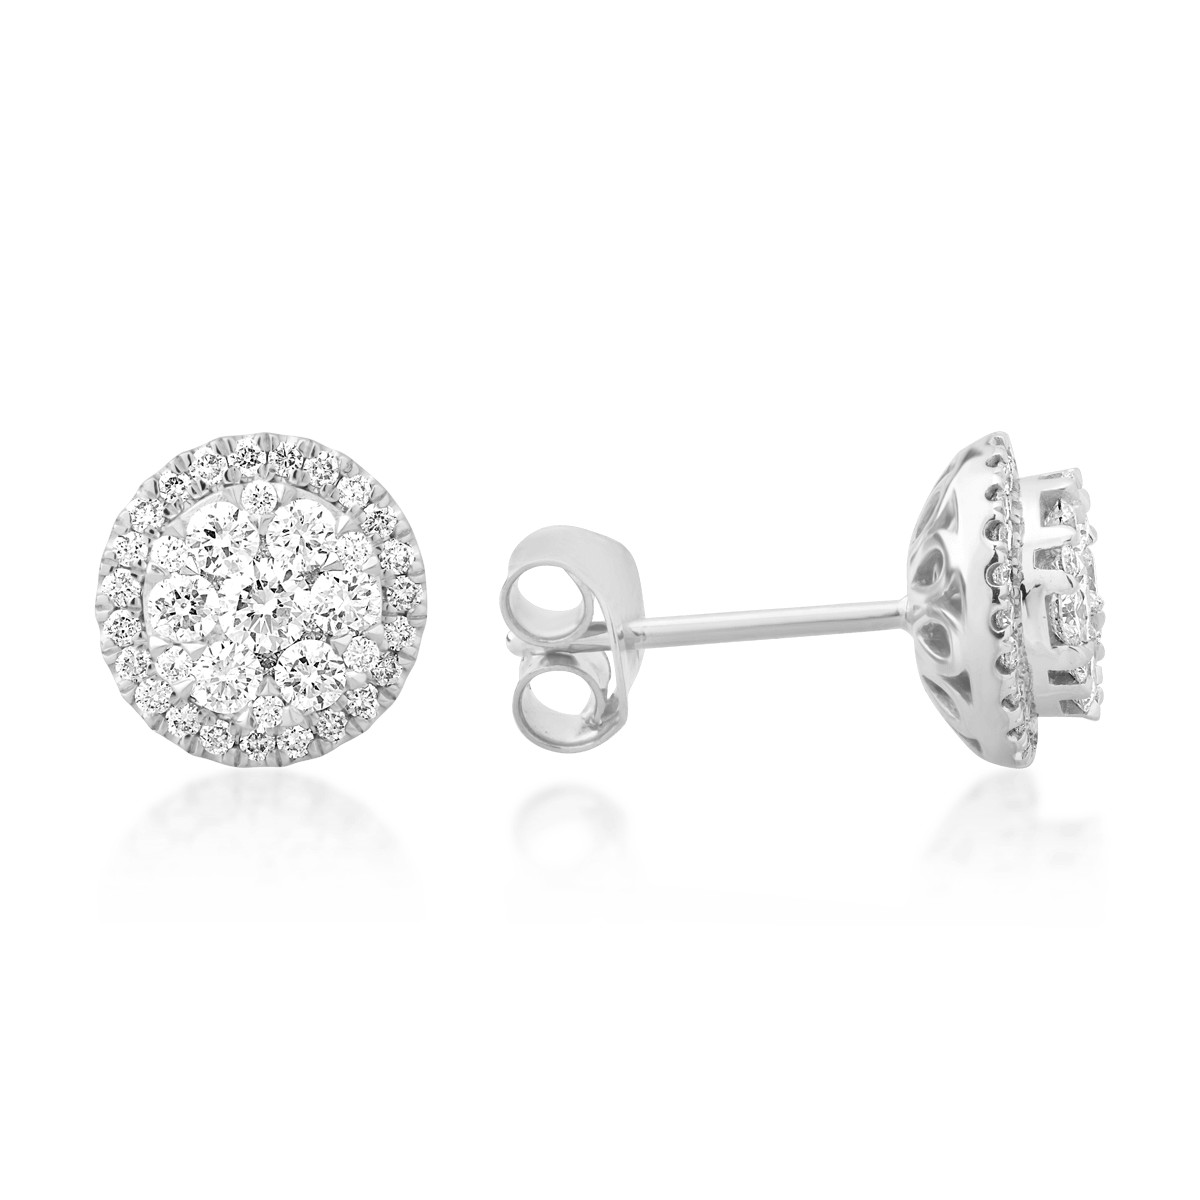 18K white gold earrings with 0.659ct diamonds